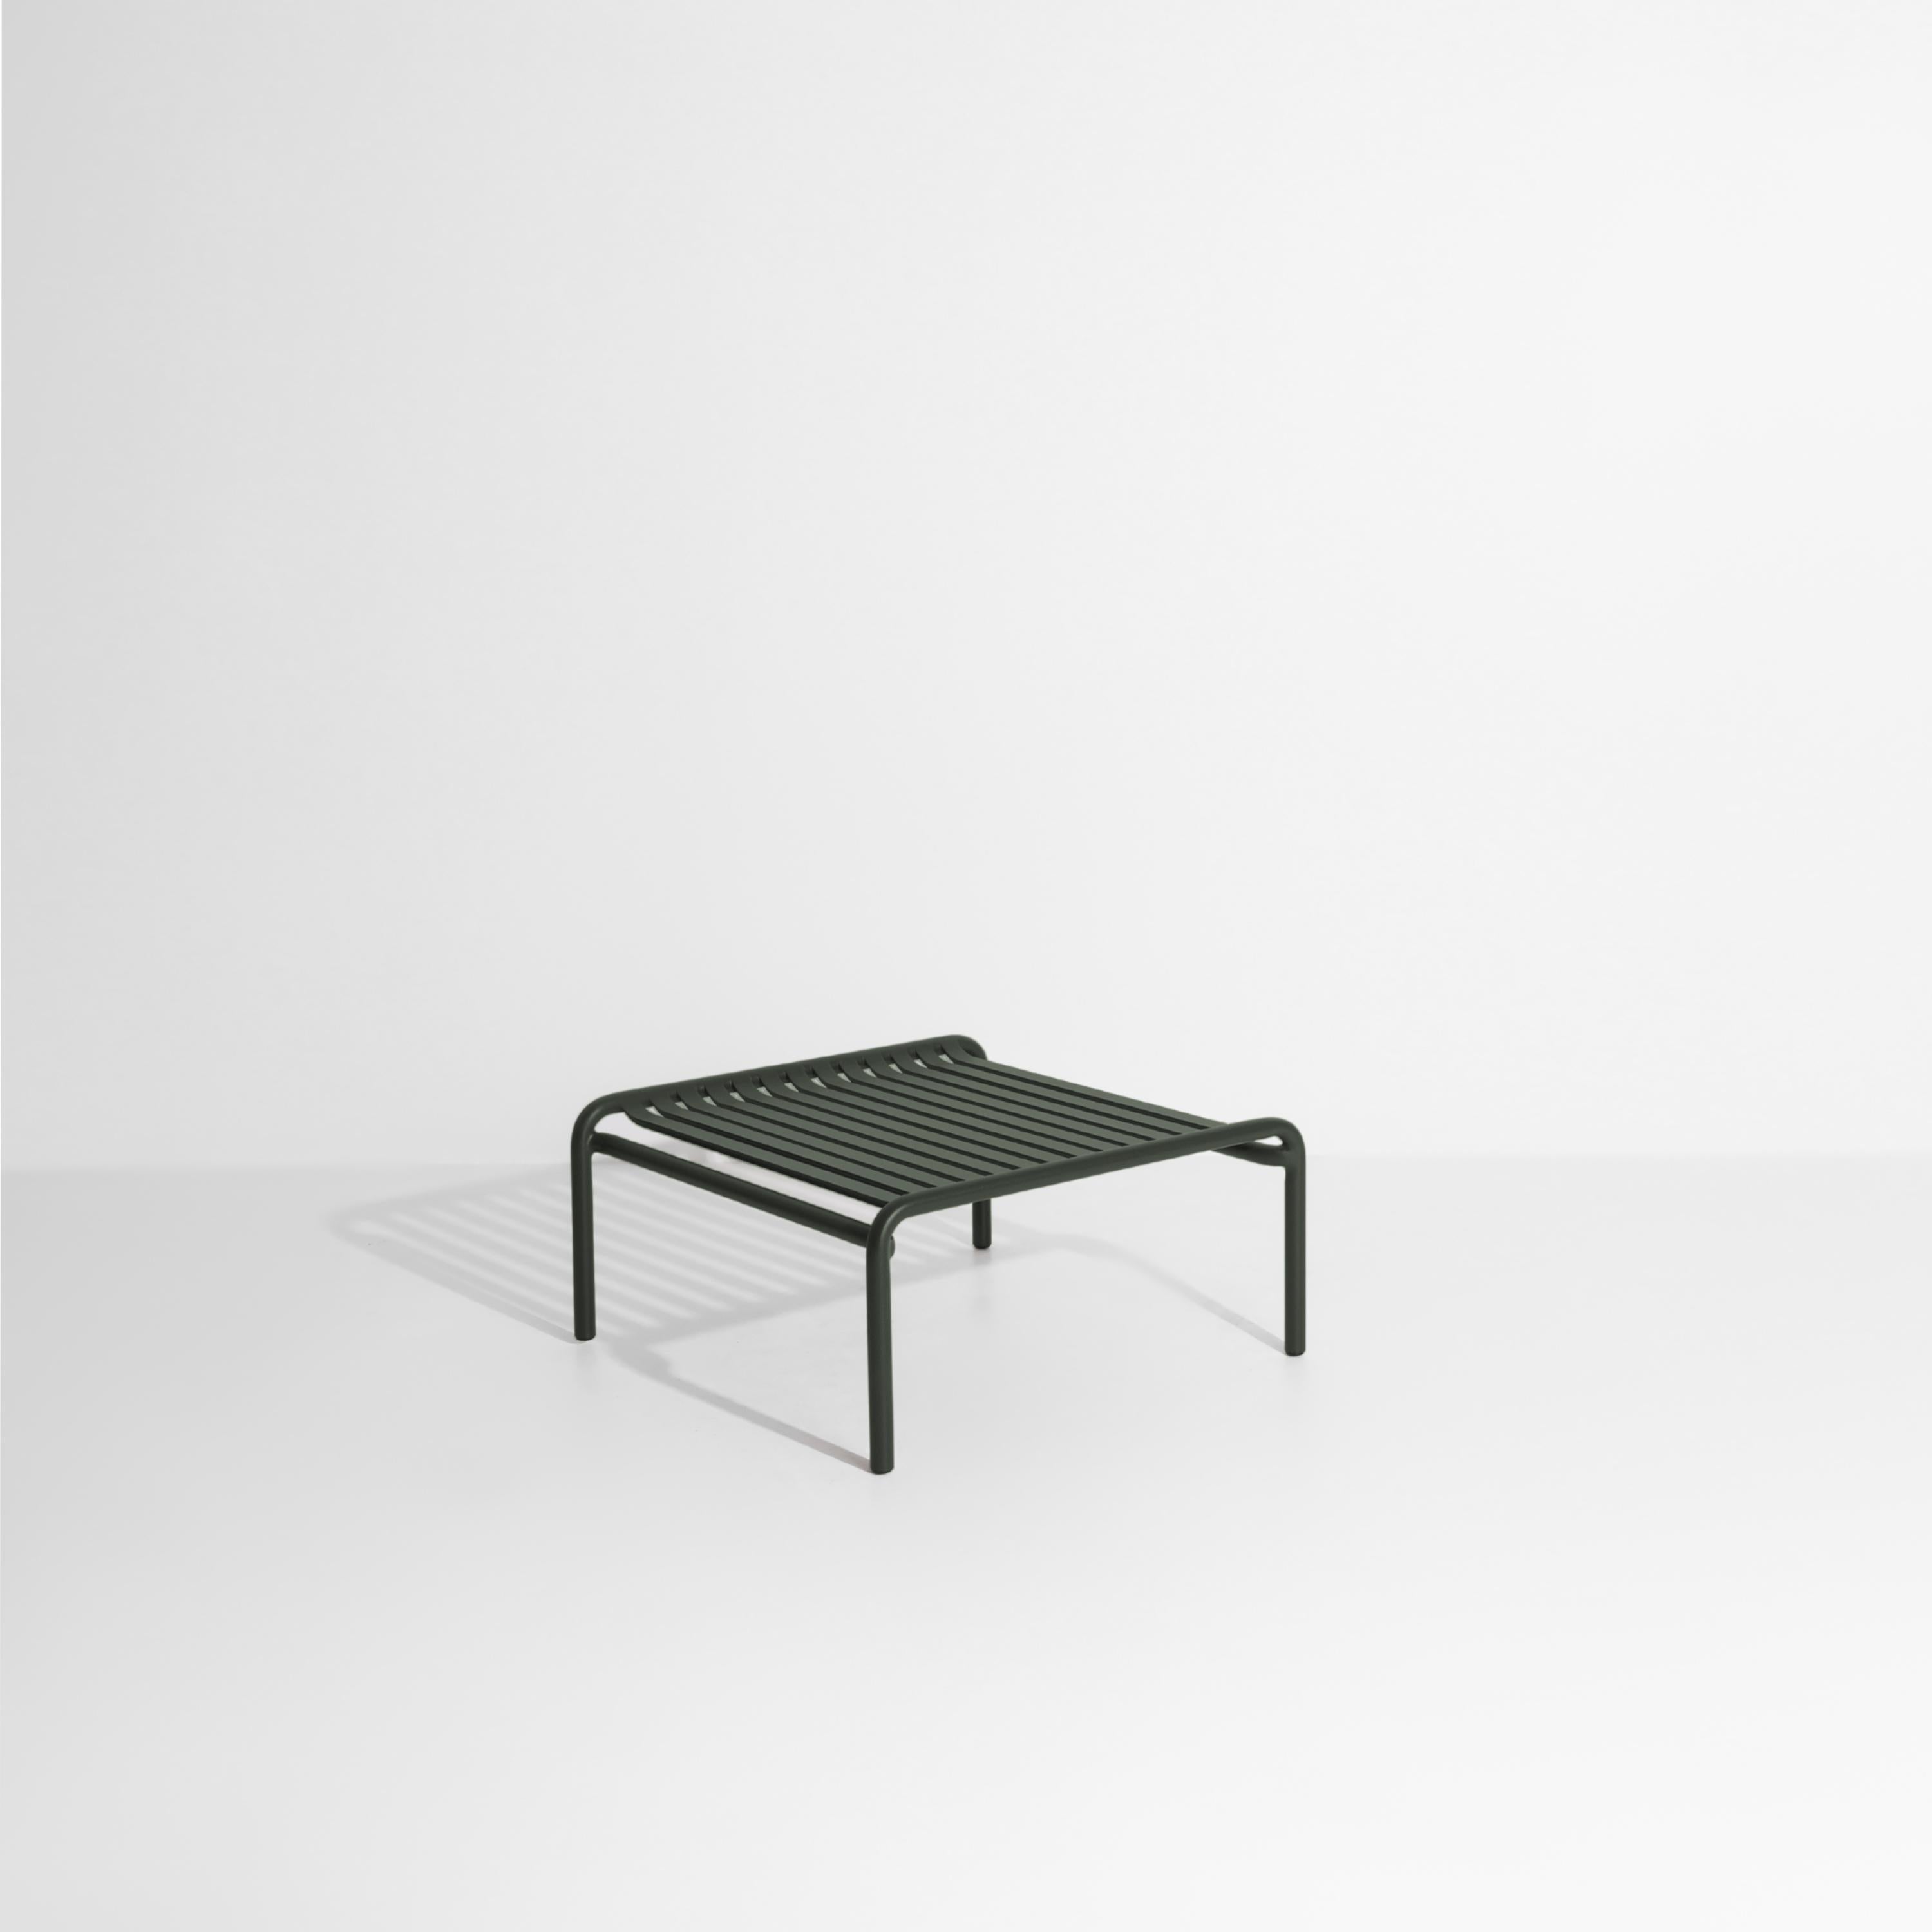 Petite Friture Week-End Coffee Table in Glass Green Aluminium by Studio BrichetZiegler, 2017

The week-end collection is a full range of outdoor furniture, in aluminium grained epoxy paint, matt finish, that includes 18 functions and 8 colours for